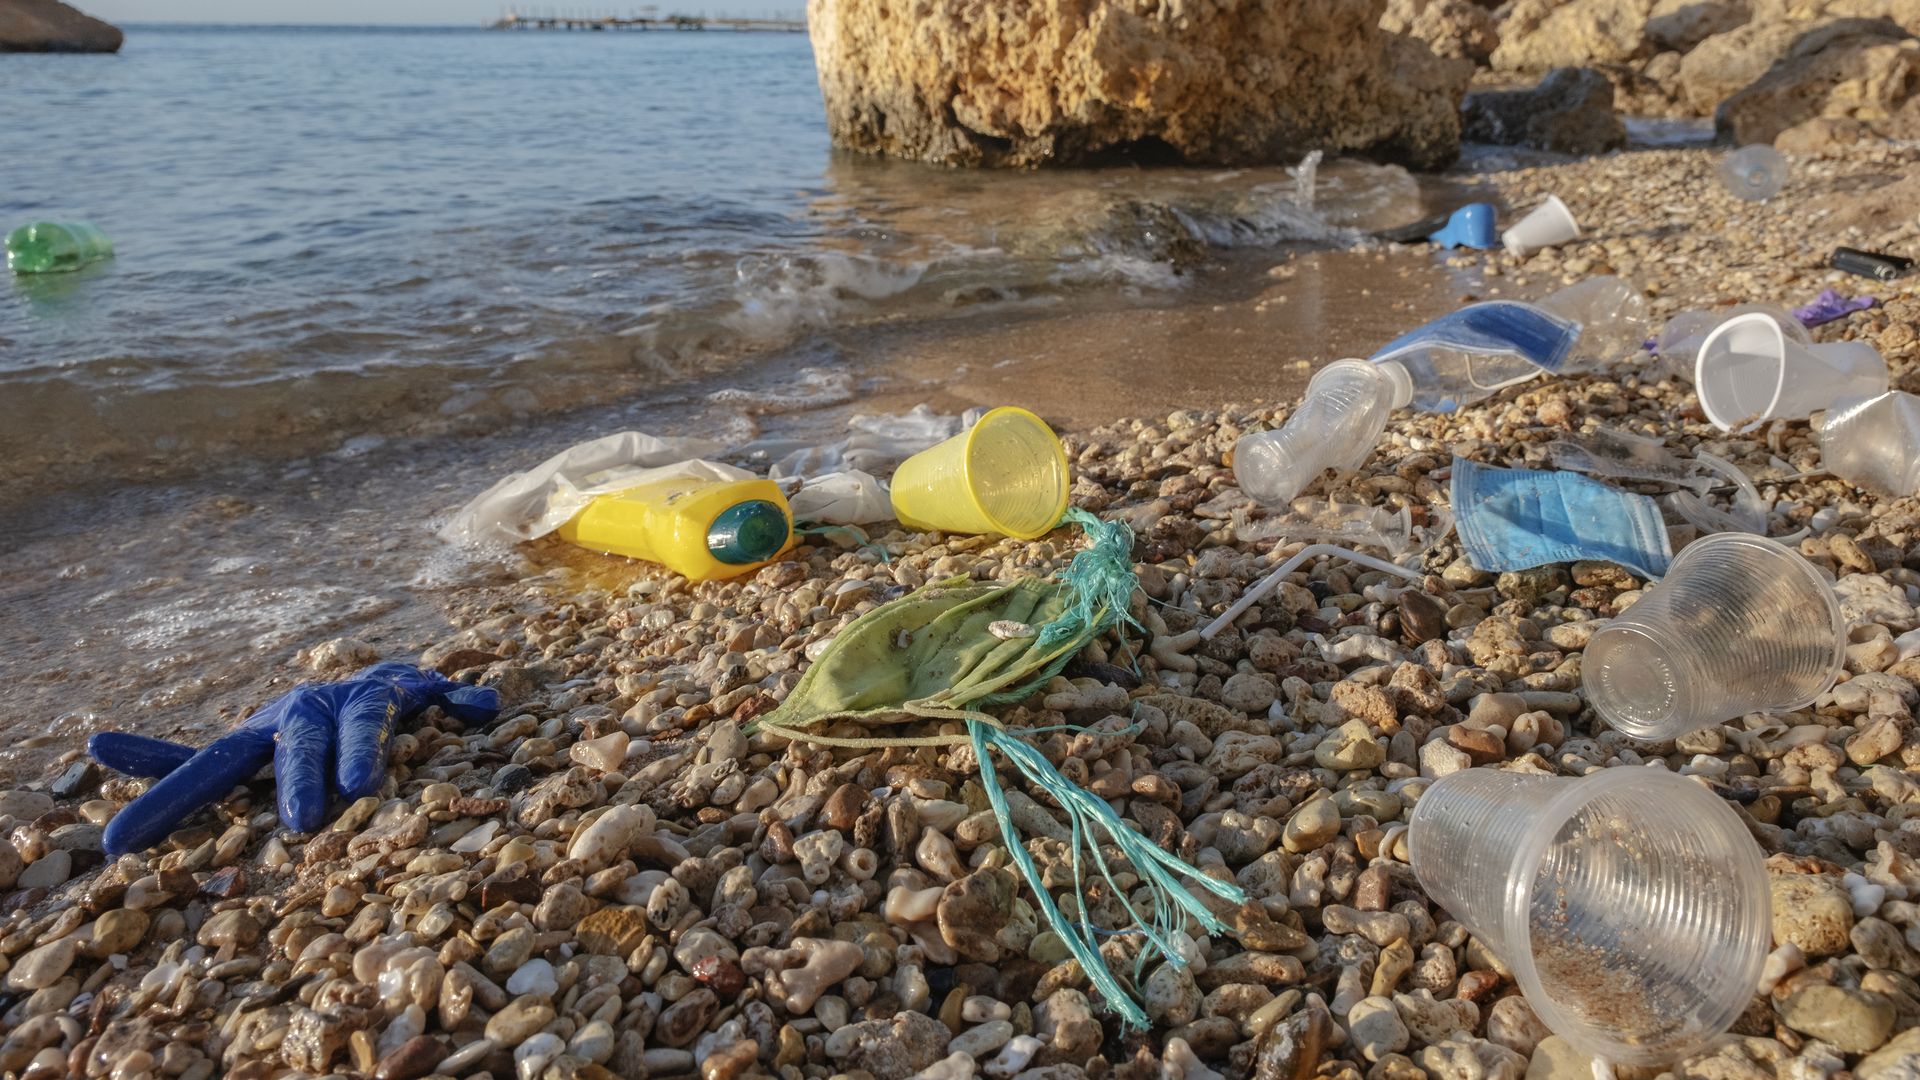 Photo of plastic waste, including a rubber glove, plastic cup and face mask, on a sea shore next to a body of water